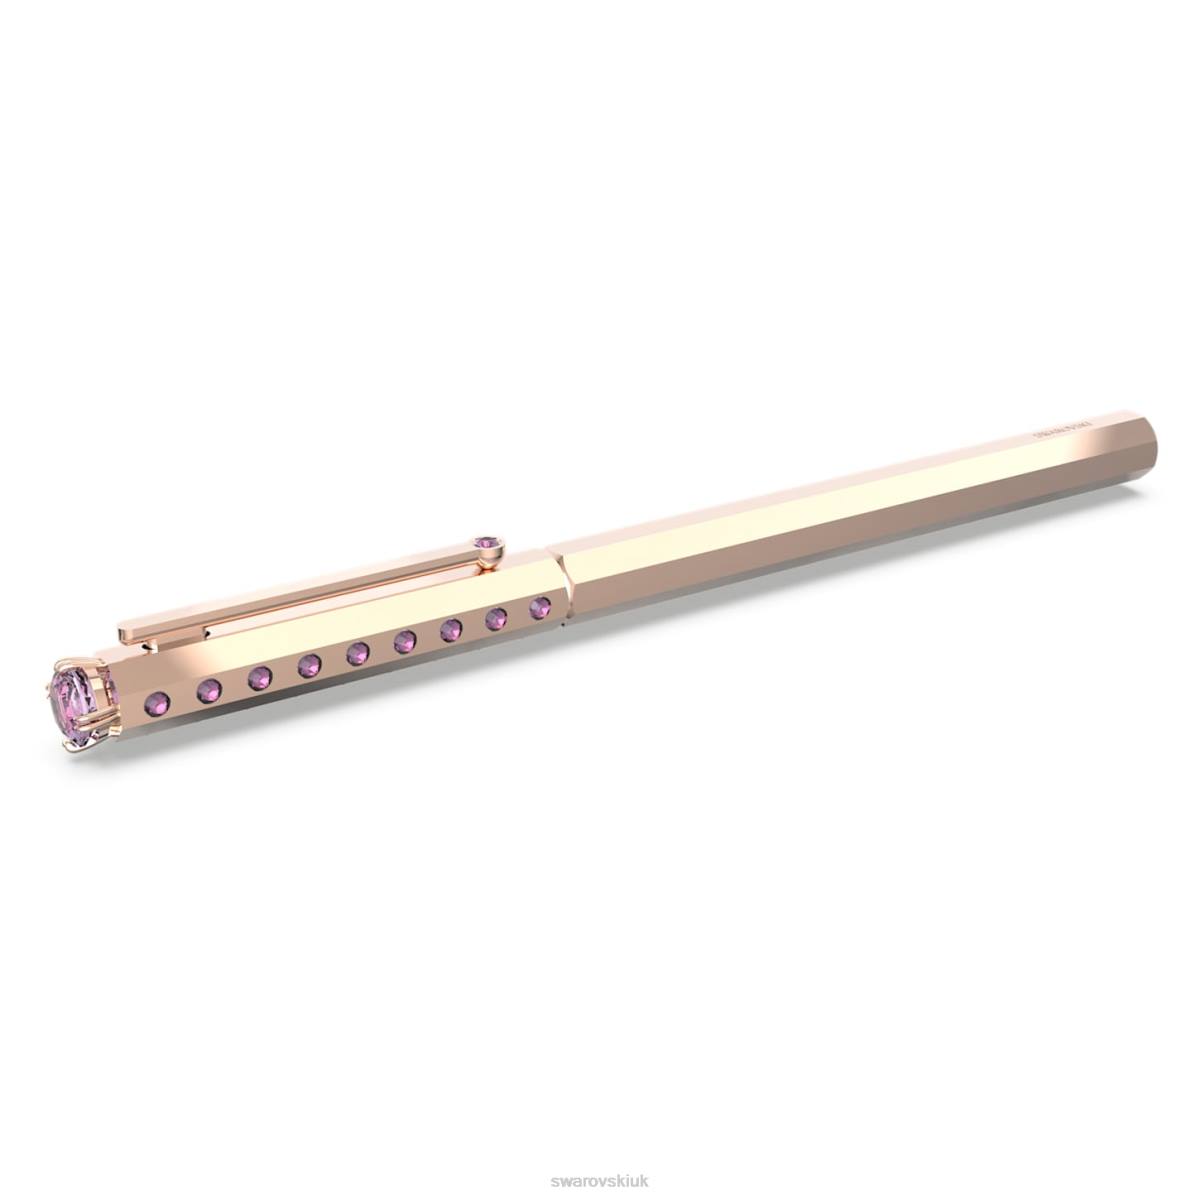 Accessories Swarovski Ballpoint pen Classic, Pink, Rose gold-tone plated 48JX1279